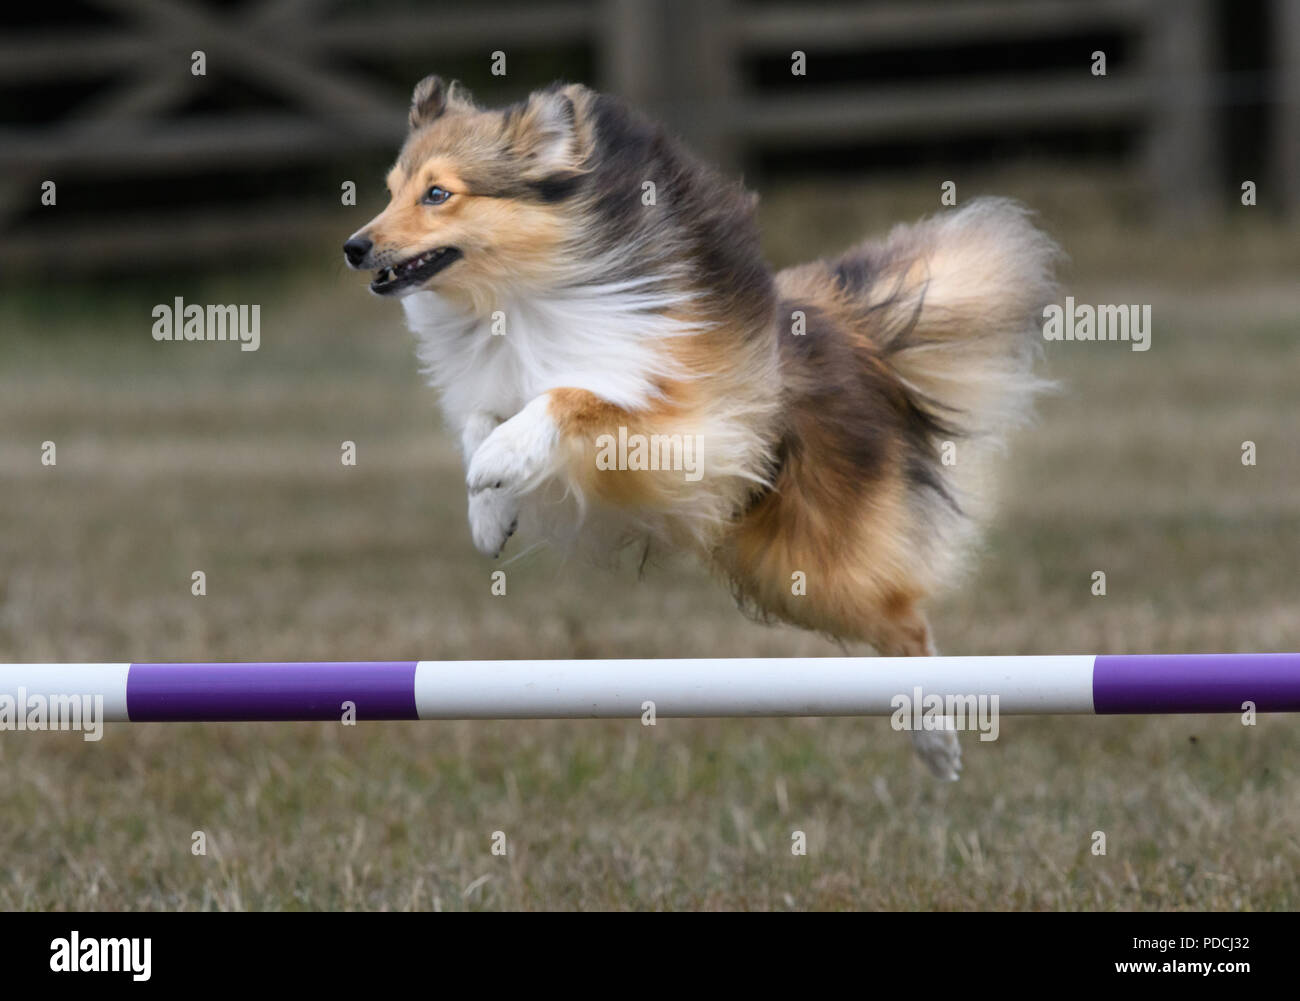 Rockingham Castle, Corby, England. 9th August 2018. With a look of keen concentration, a competing dog leaps a hurdle successfully at the Kennel Club's international dog agility competition in the Great Park of Rockingham castle, Corby, England, on 9th August 2018. Credit: Michael Foley/Alamy Live News Stock Photo